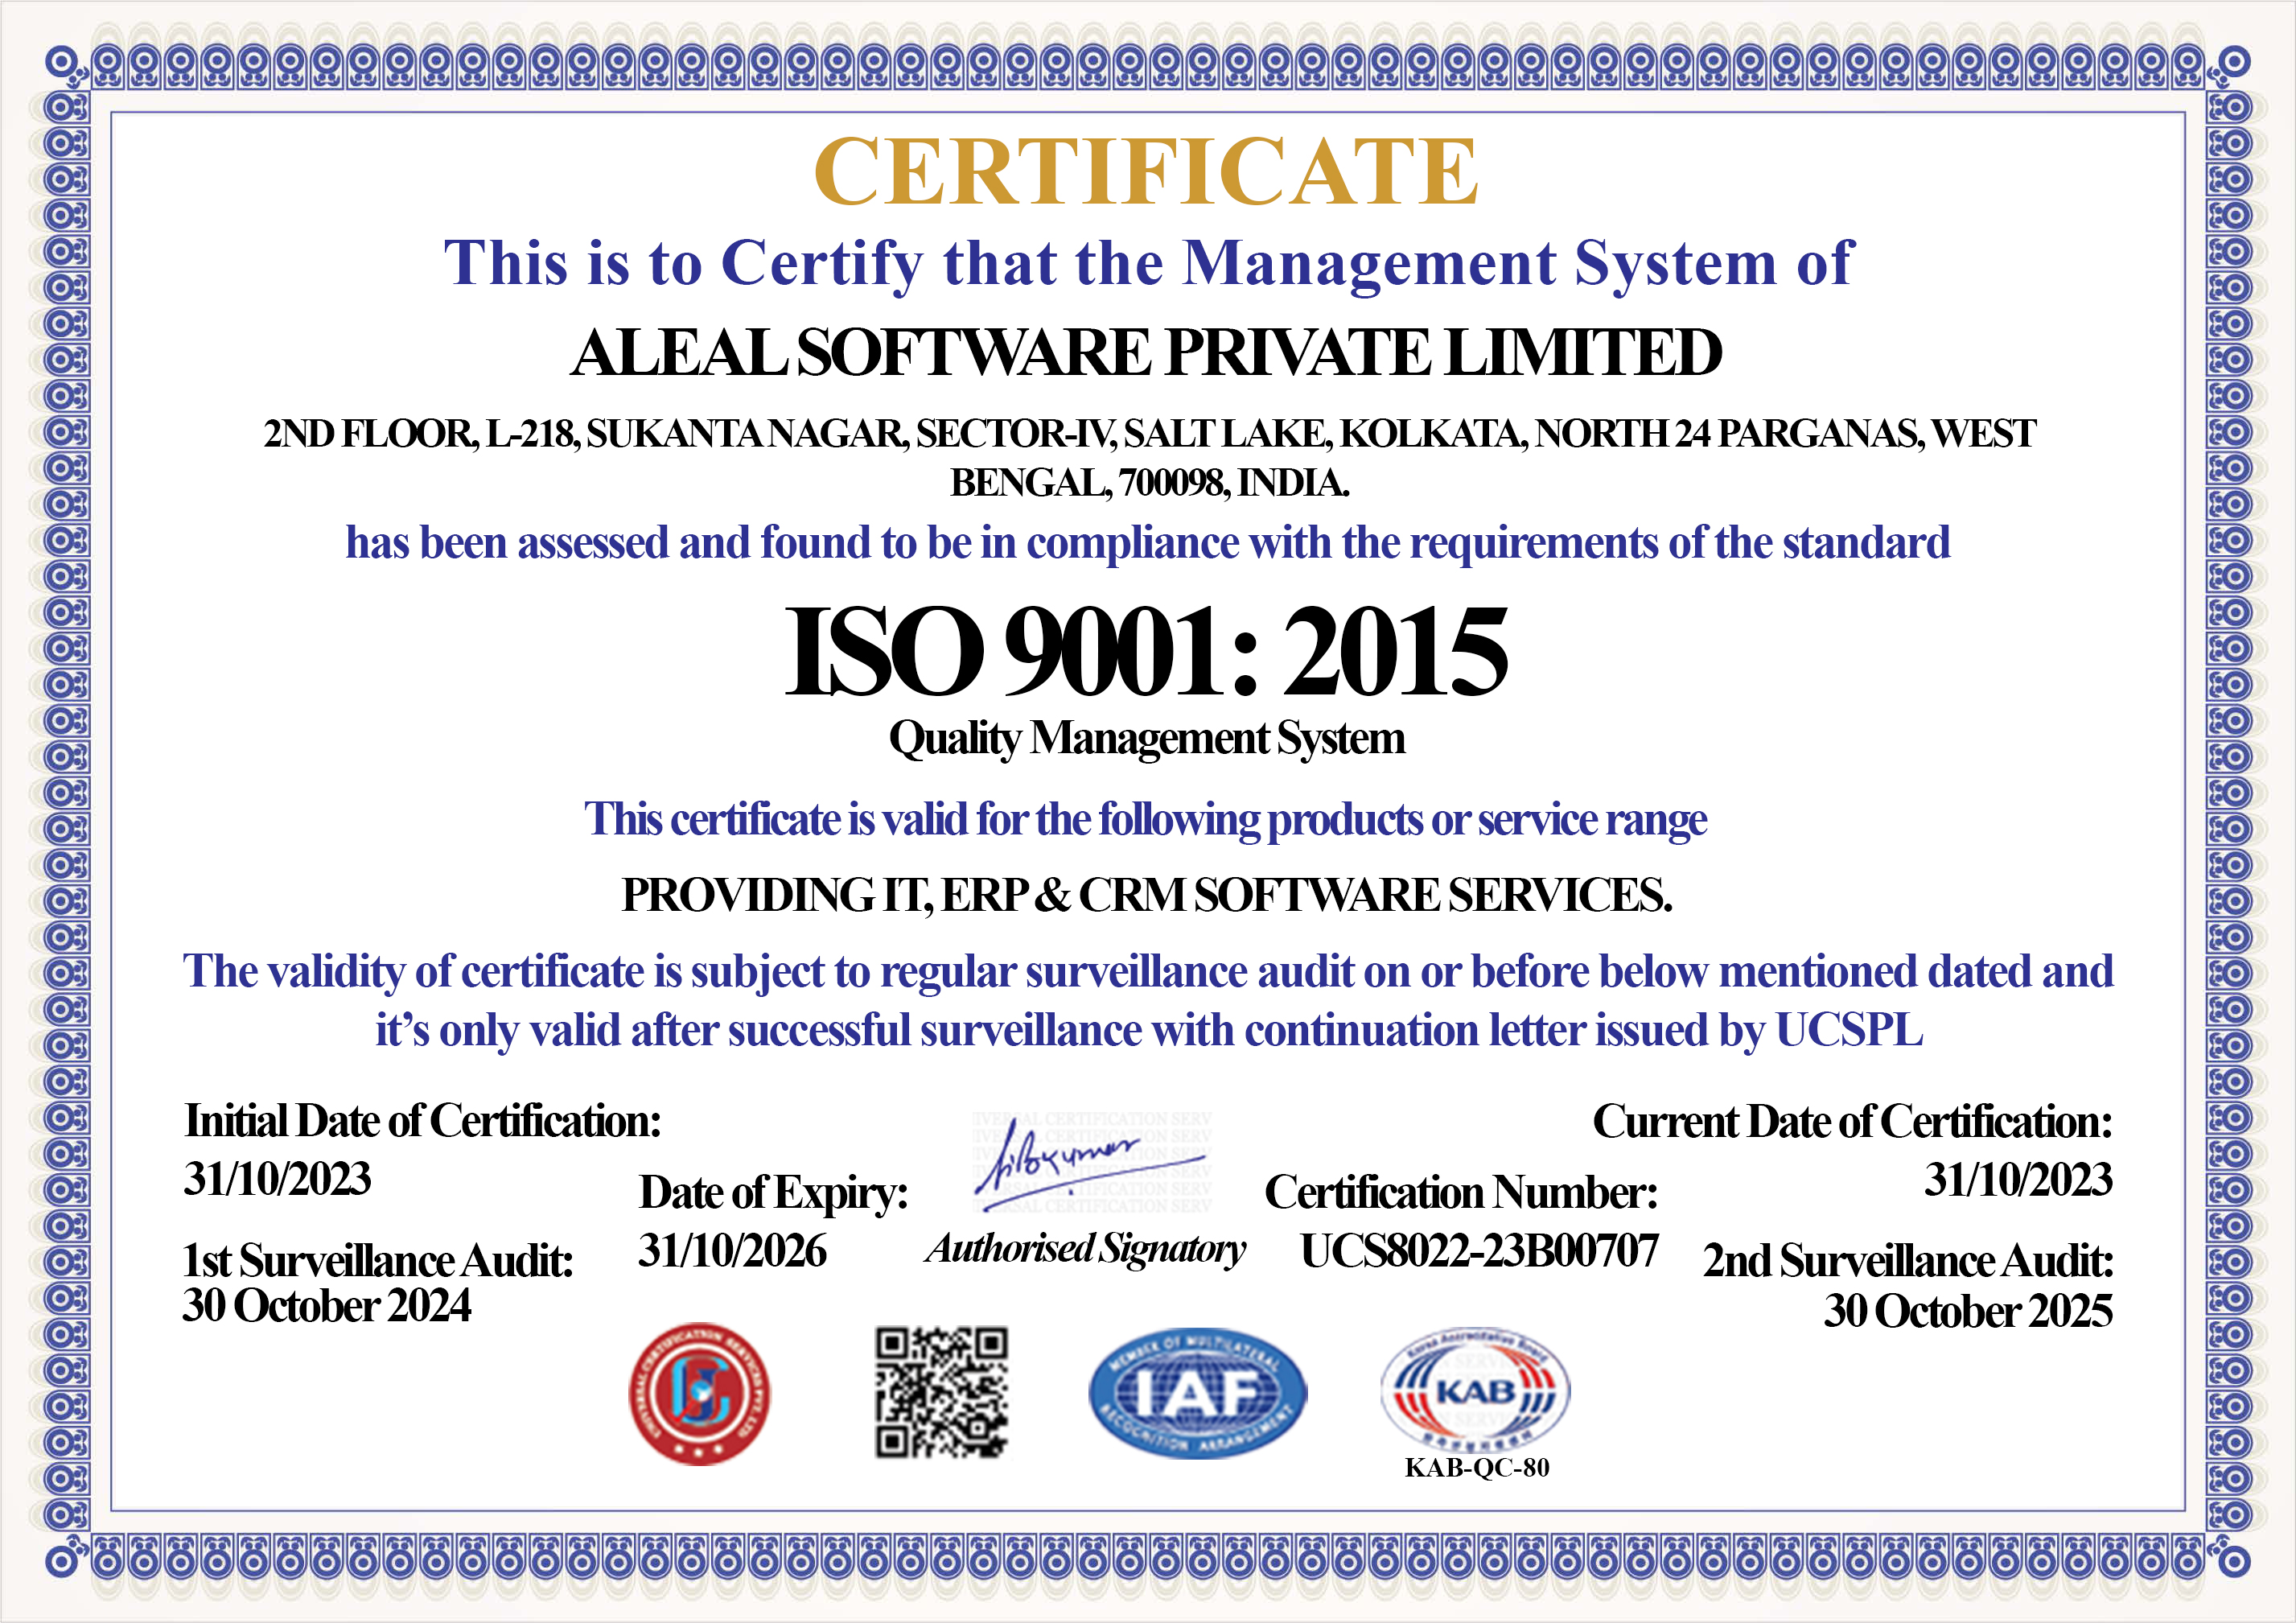 isot_certificate